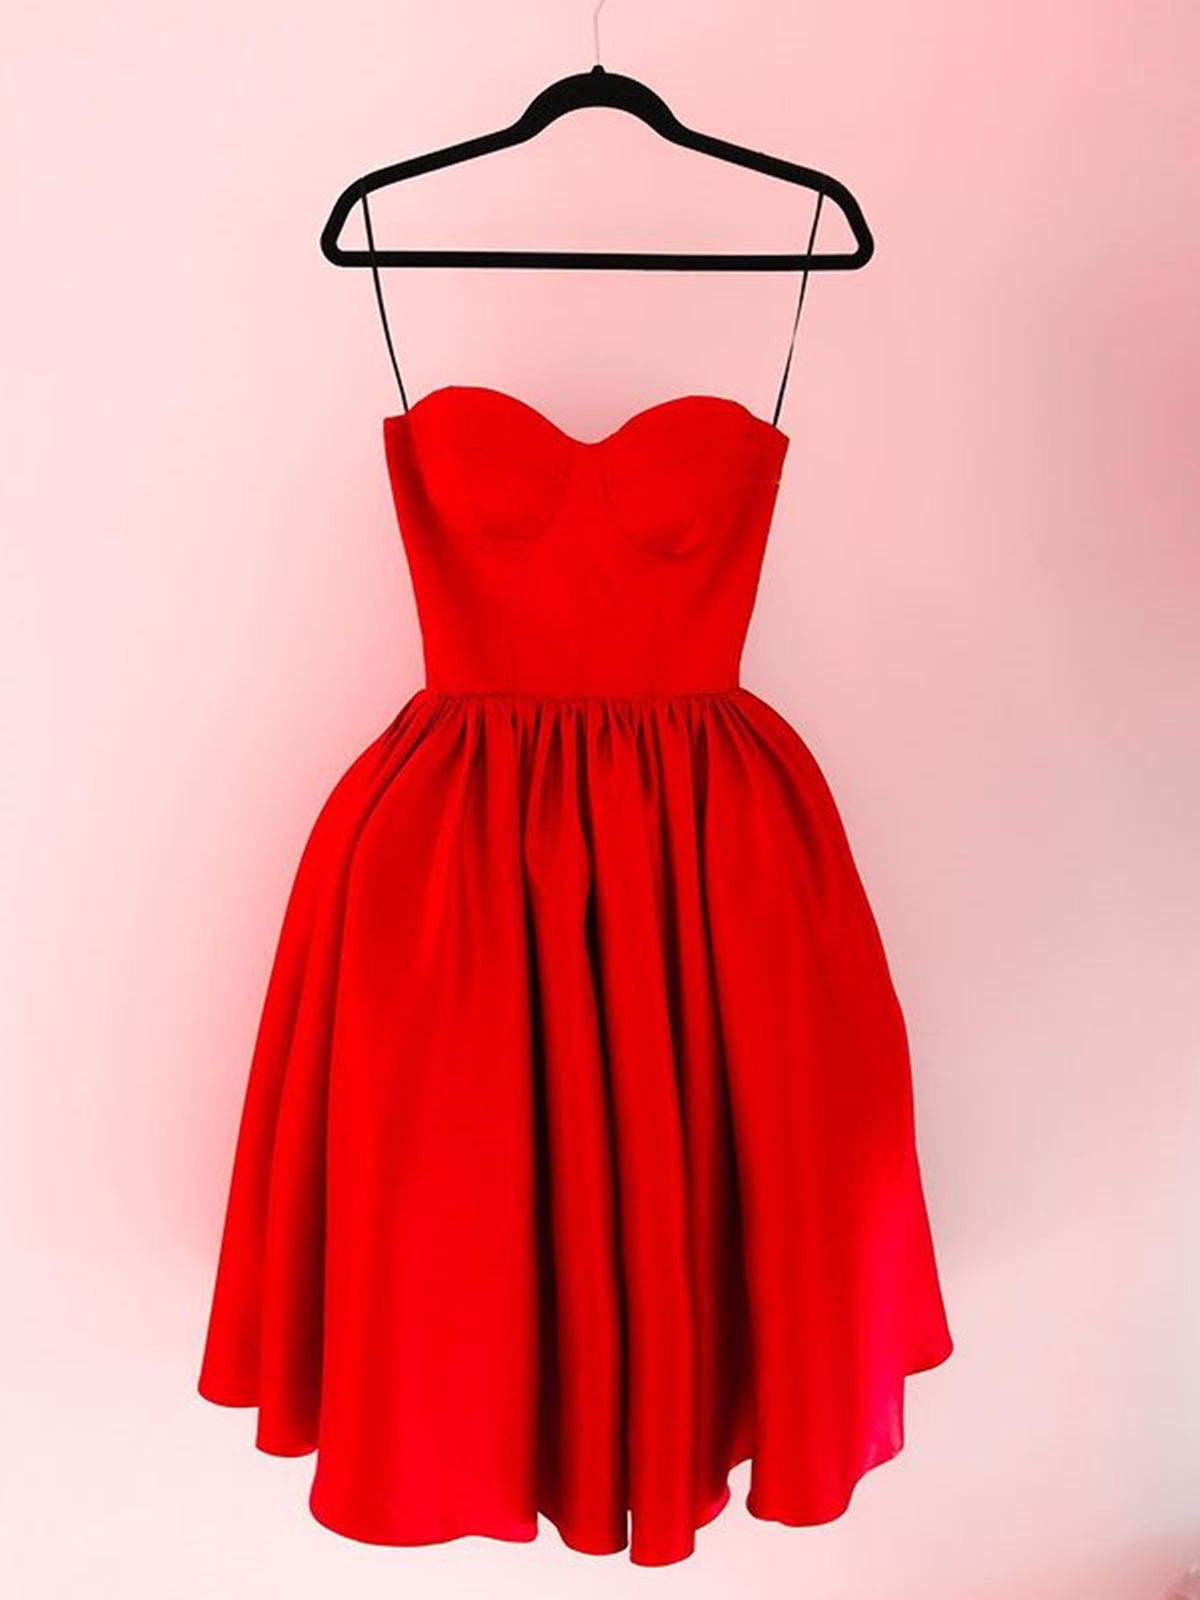 Sweetheart Neck Red Satin Short Prom Dresses, Short Red Homecoming Dresses, Red Formal Graduation Evening Dresses 